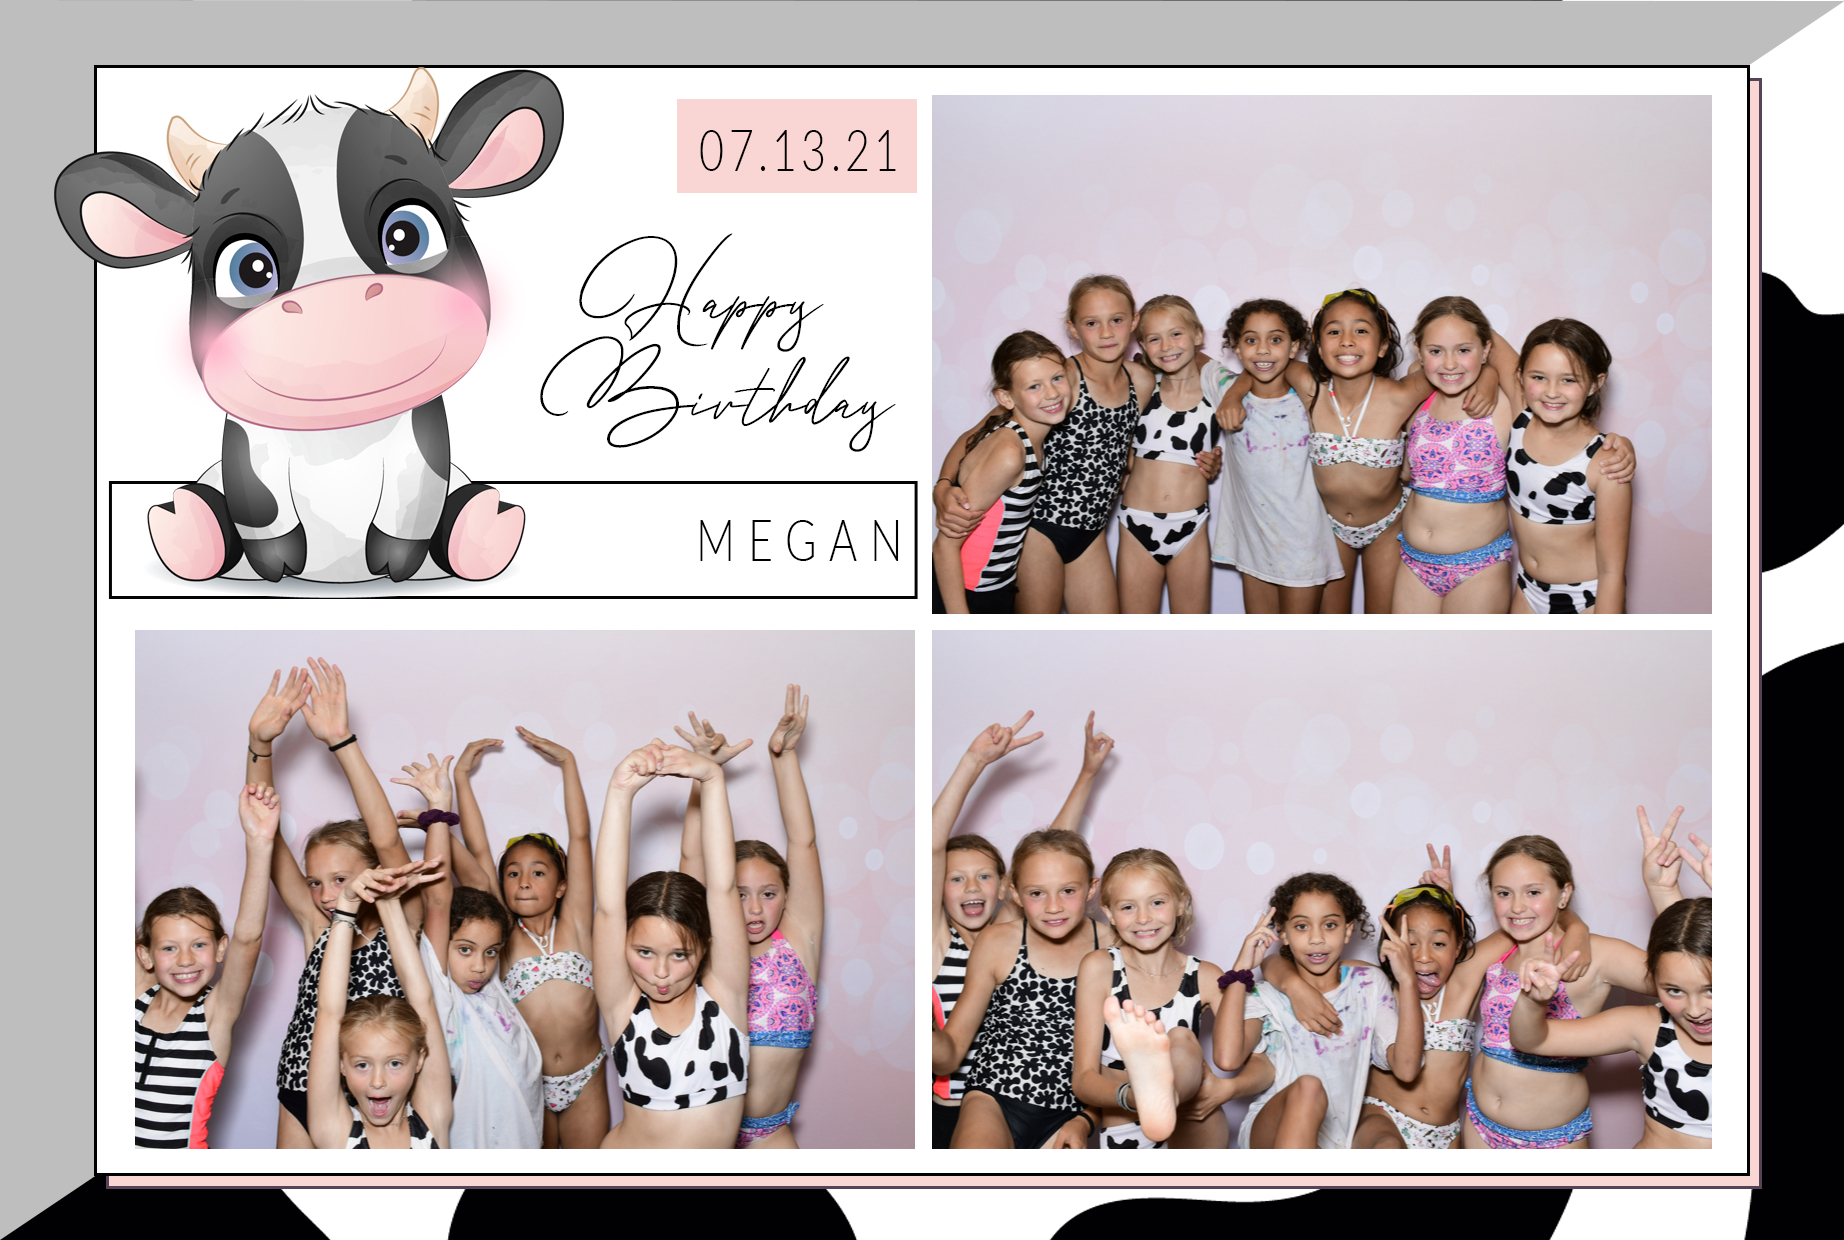 Sample photo from a birthday party